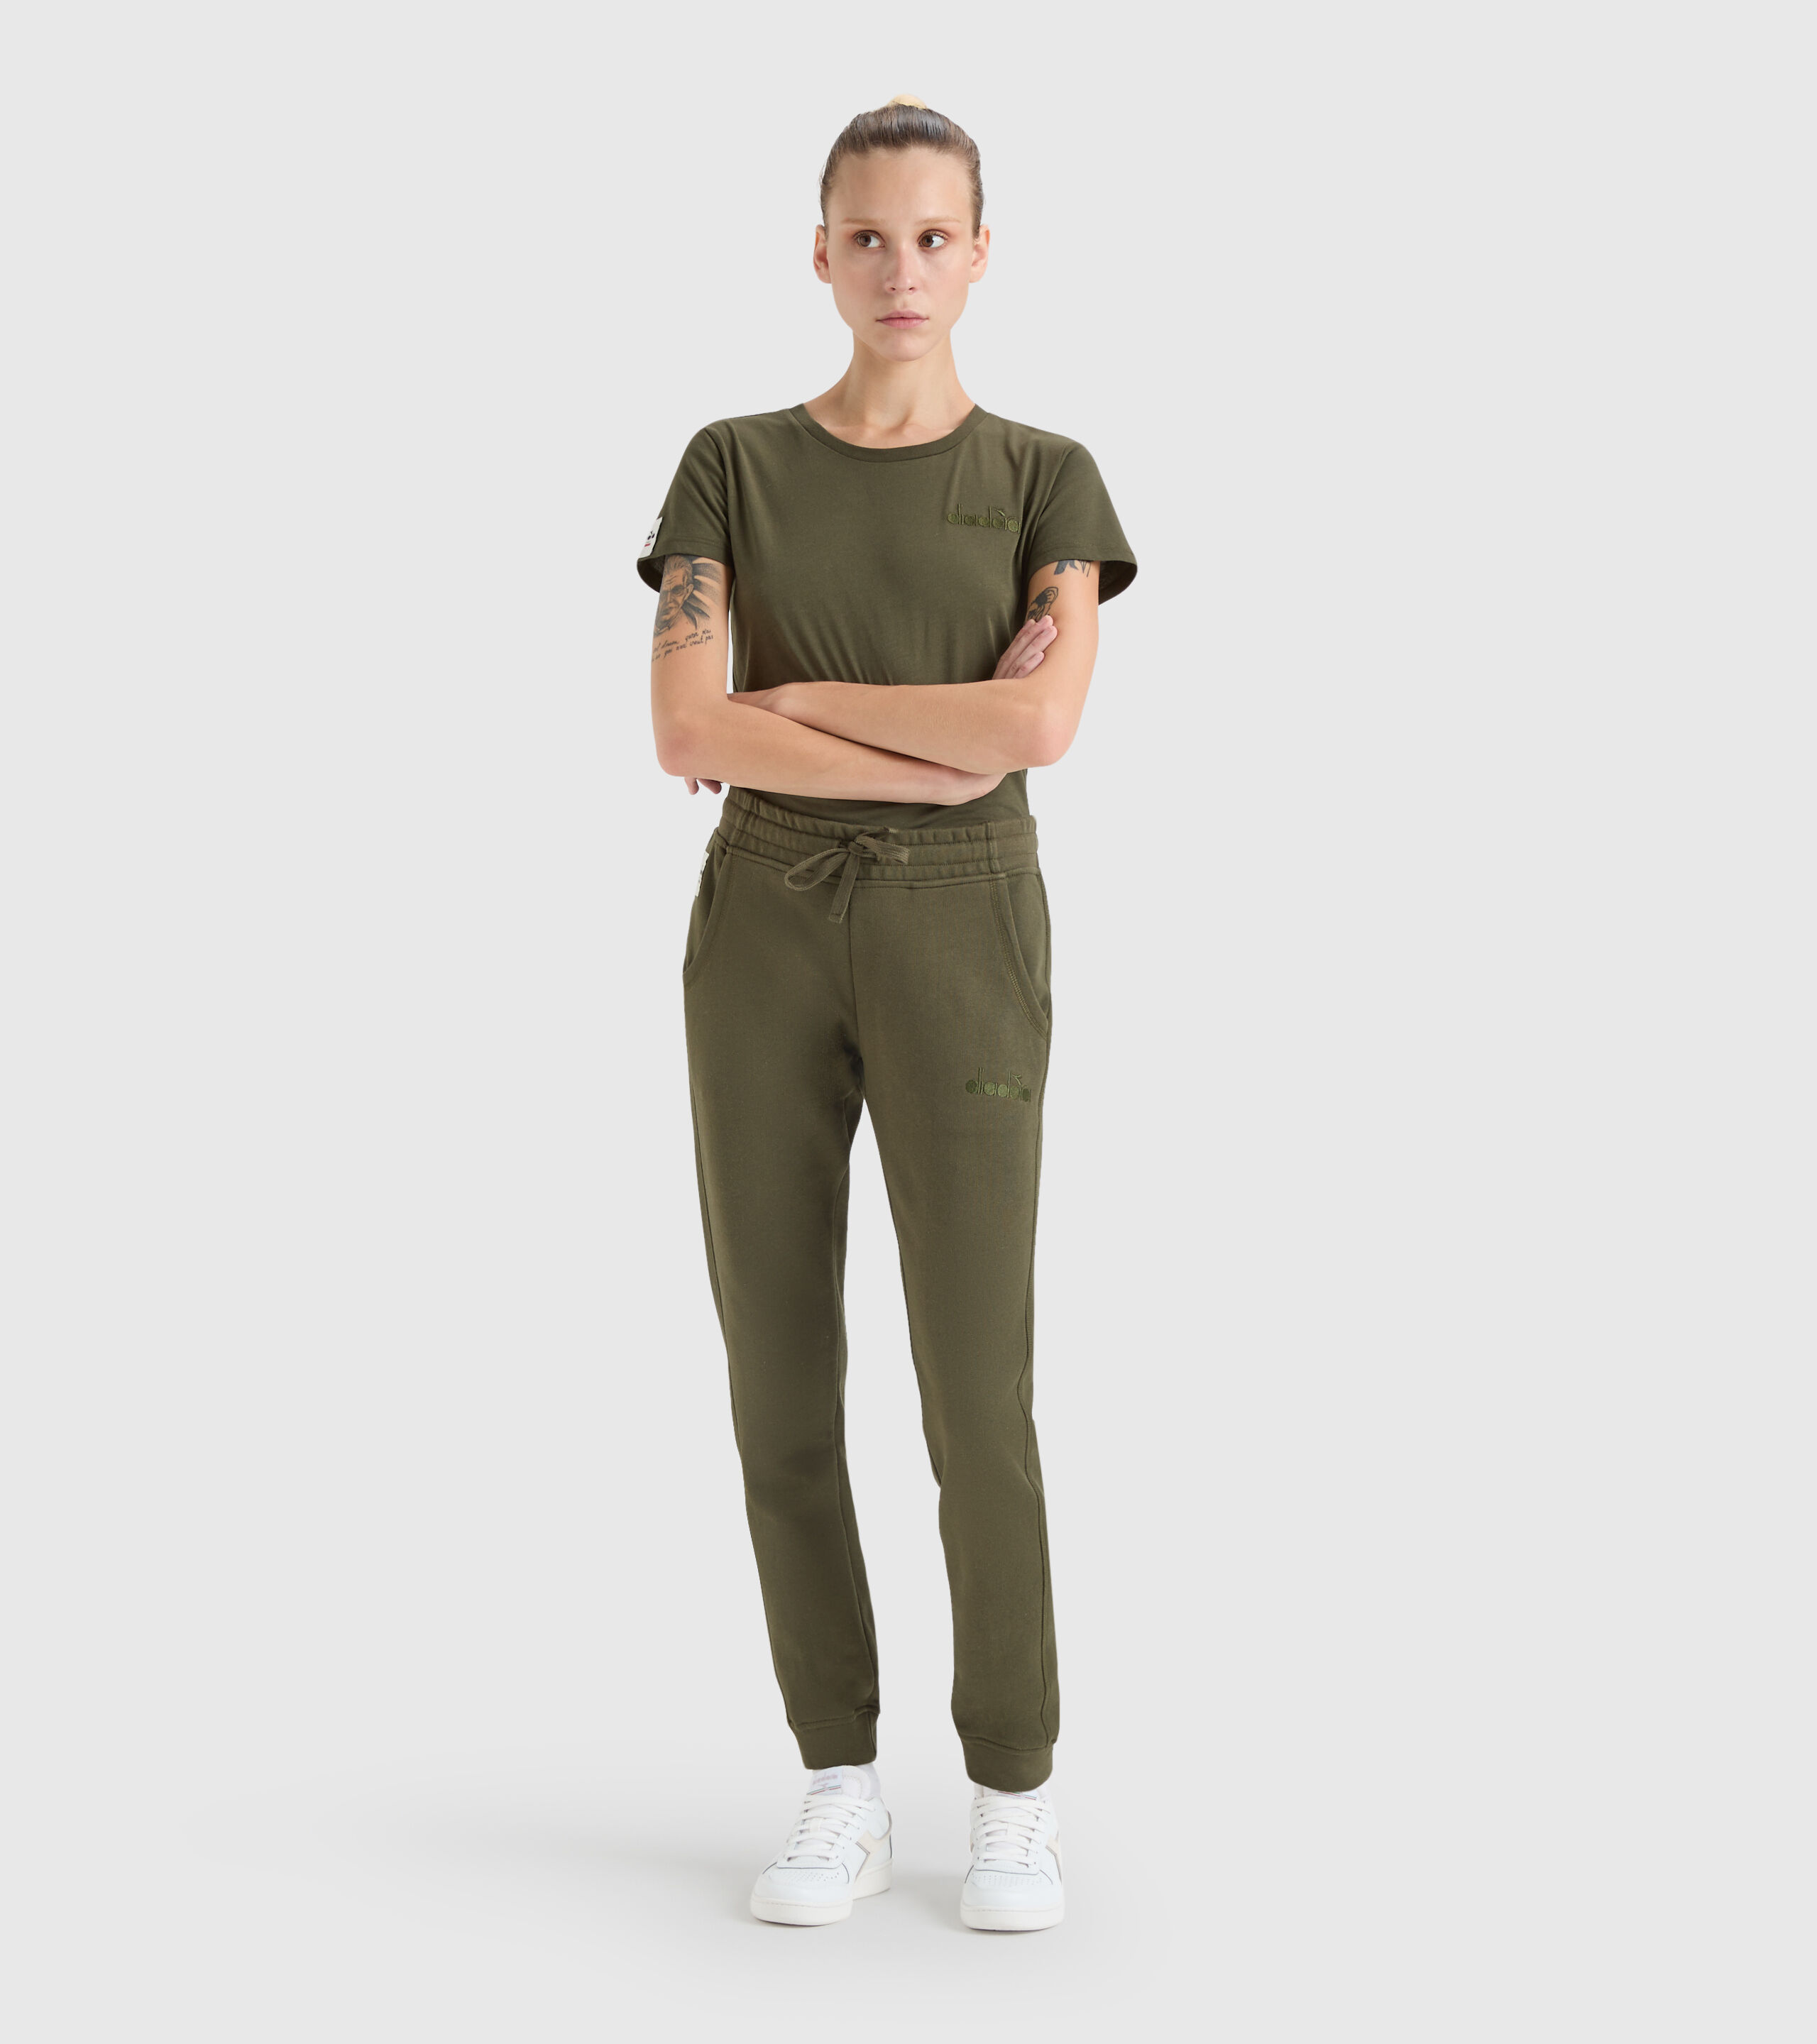 L JOGGER PANT MII Cotton sports trousers  Made in Italy  Women  Diadora  Online Store IN